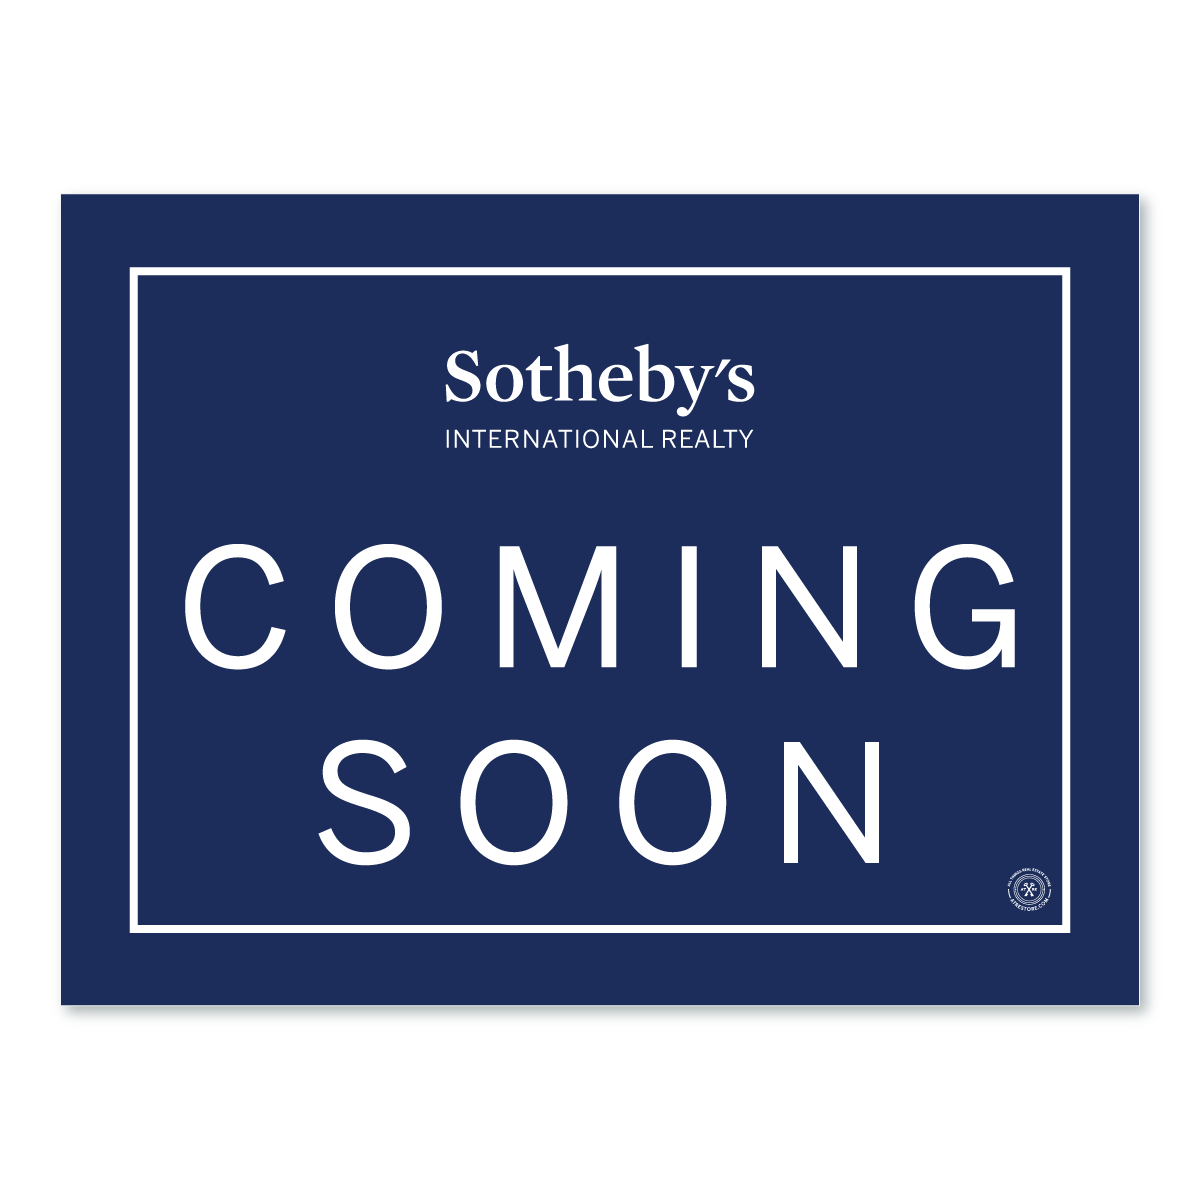 Sotheby's Coming Soon - Minimal - Yard Sign - All Things Real Estate